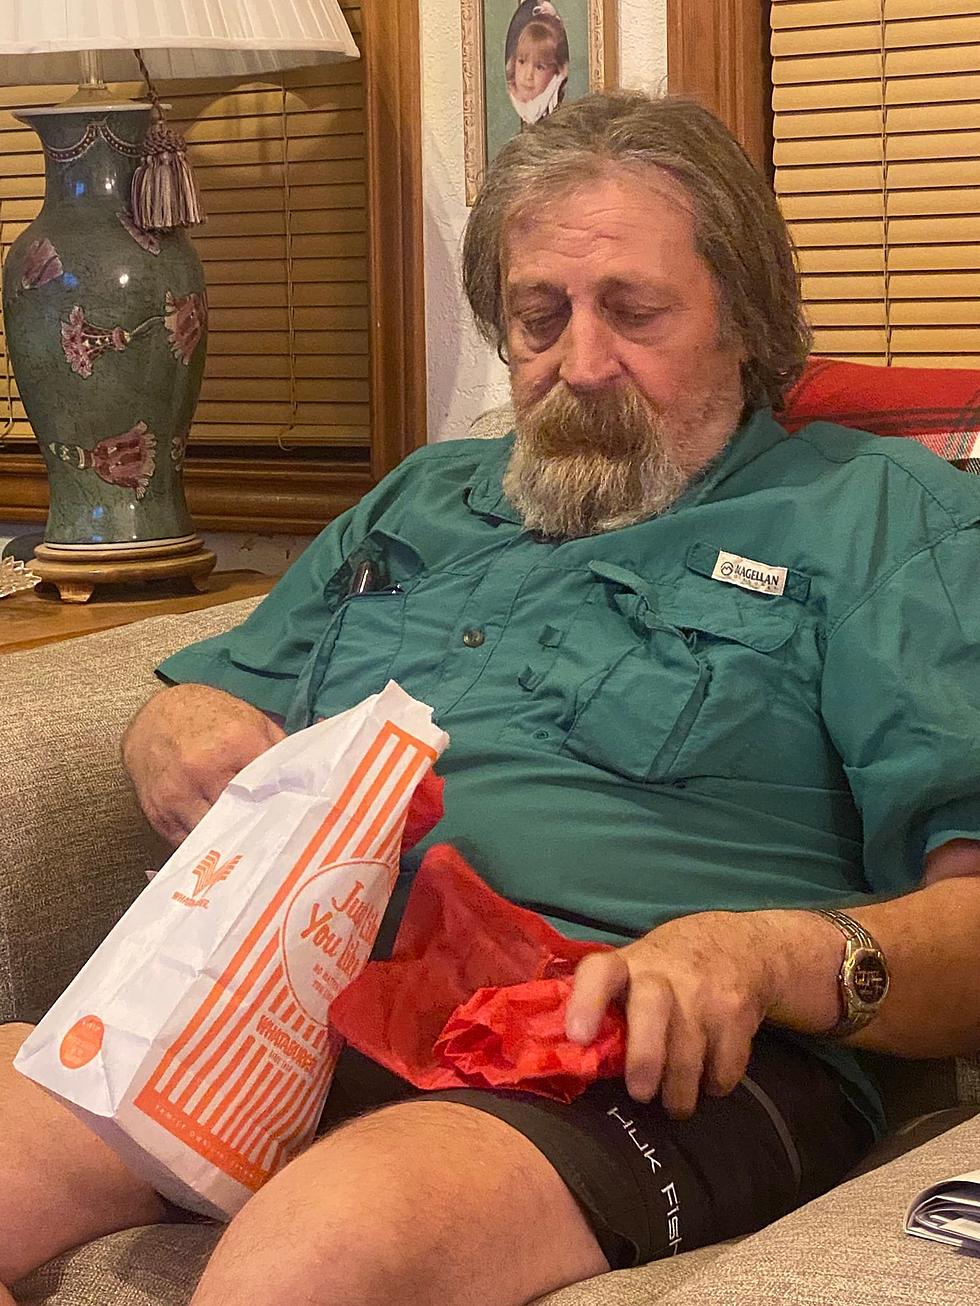 Lubbock Police Searching for Missing 66 Year-Old Man